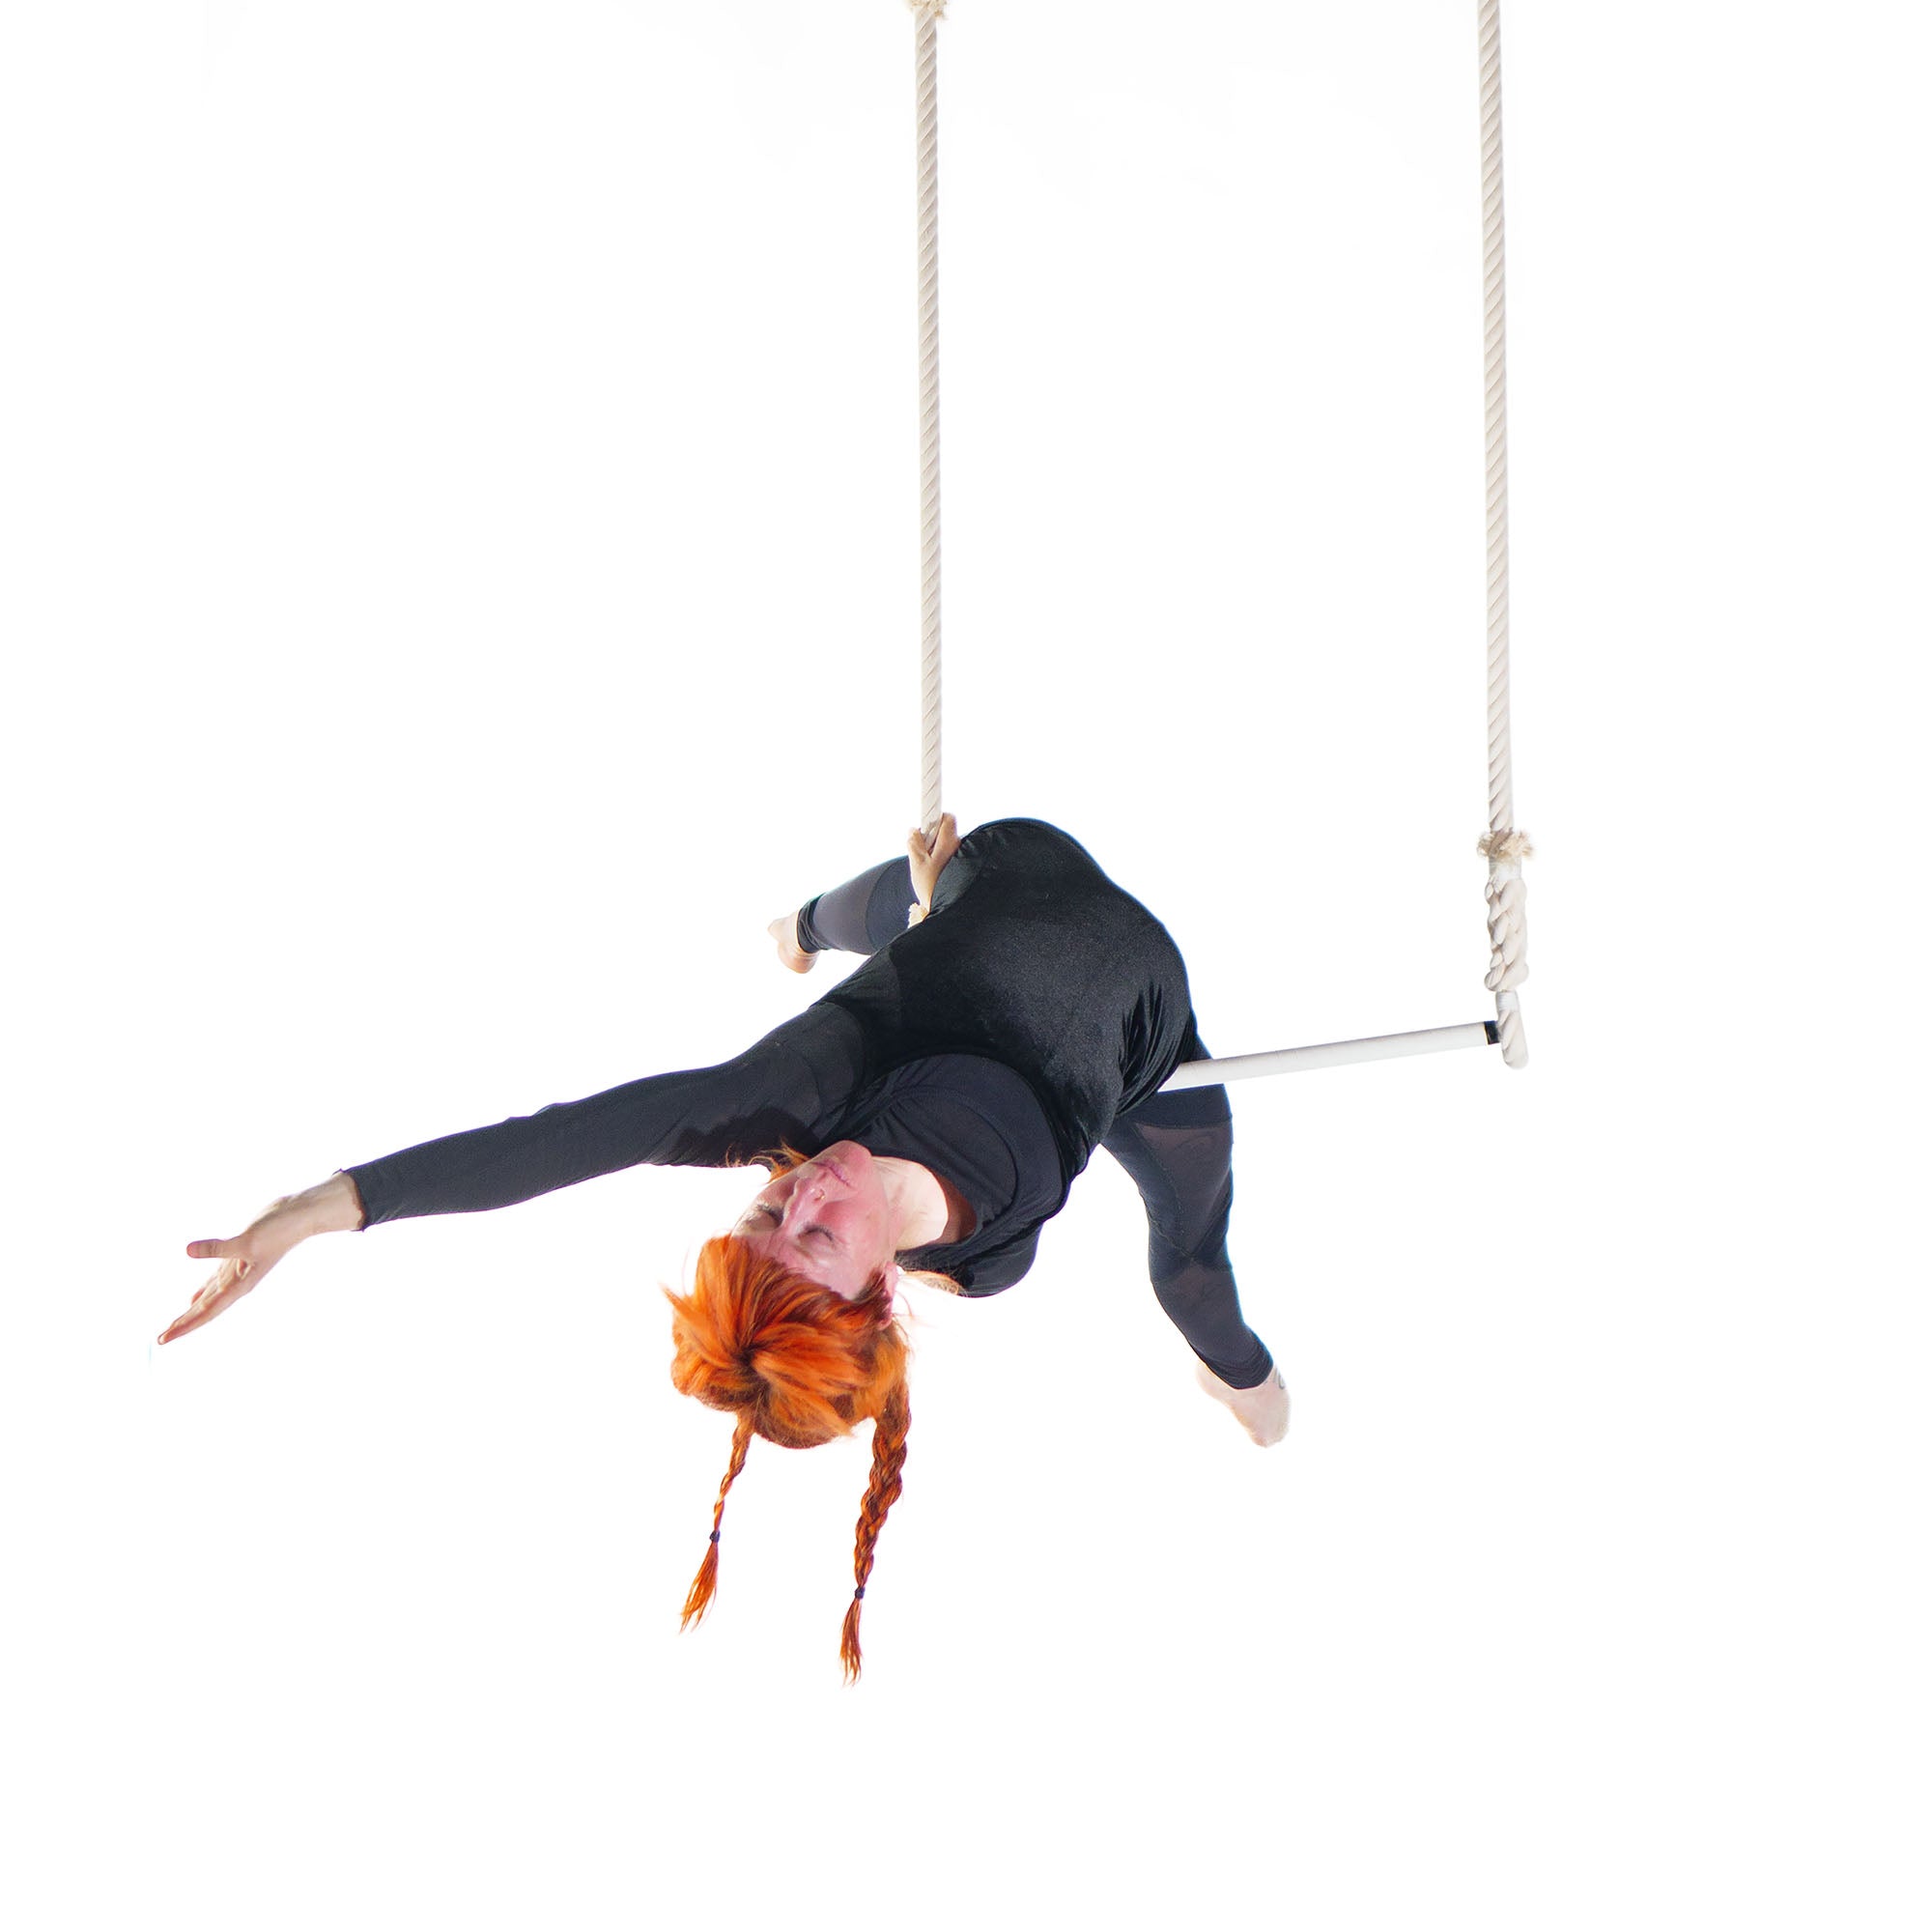 performer on Cotton Classic Trapeze